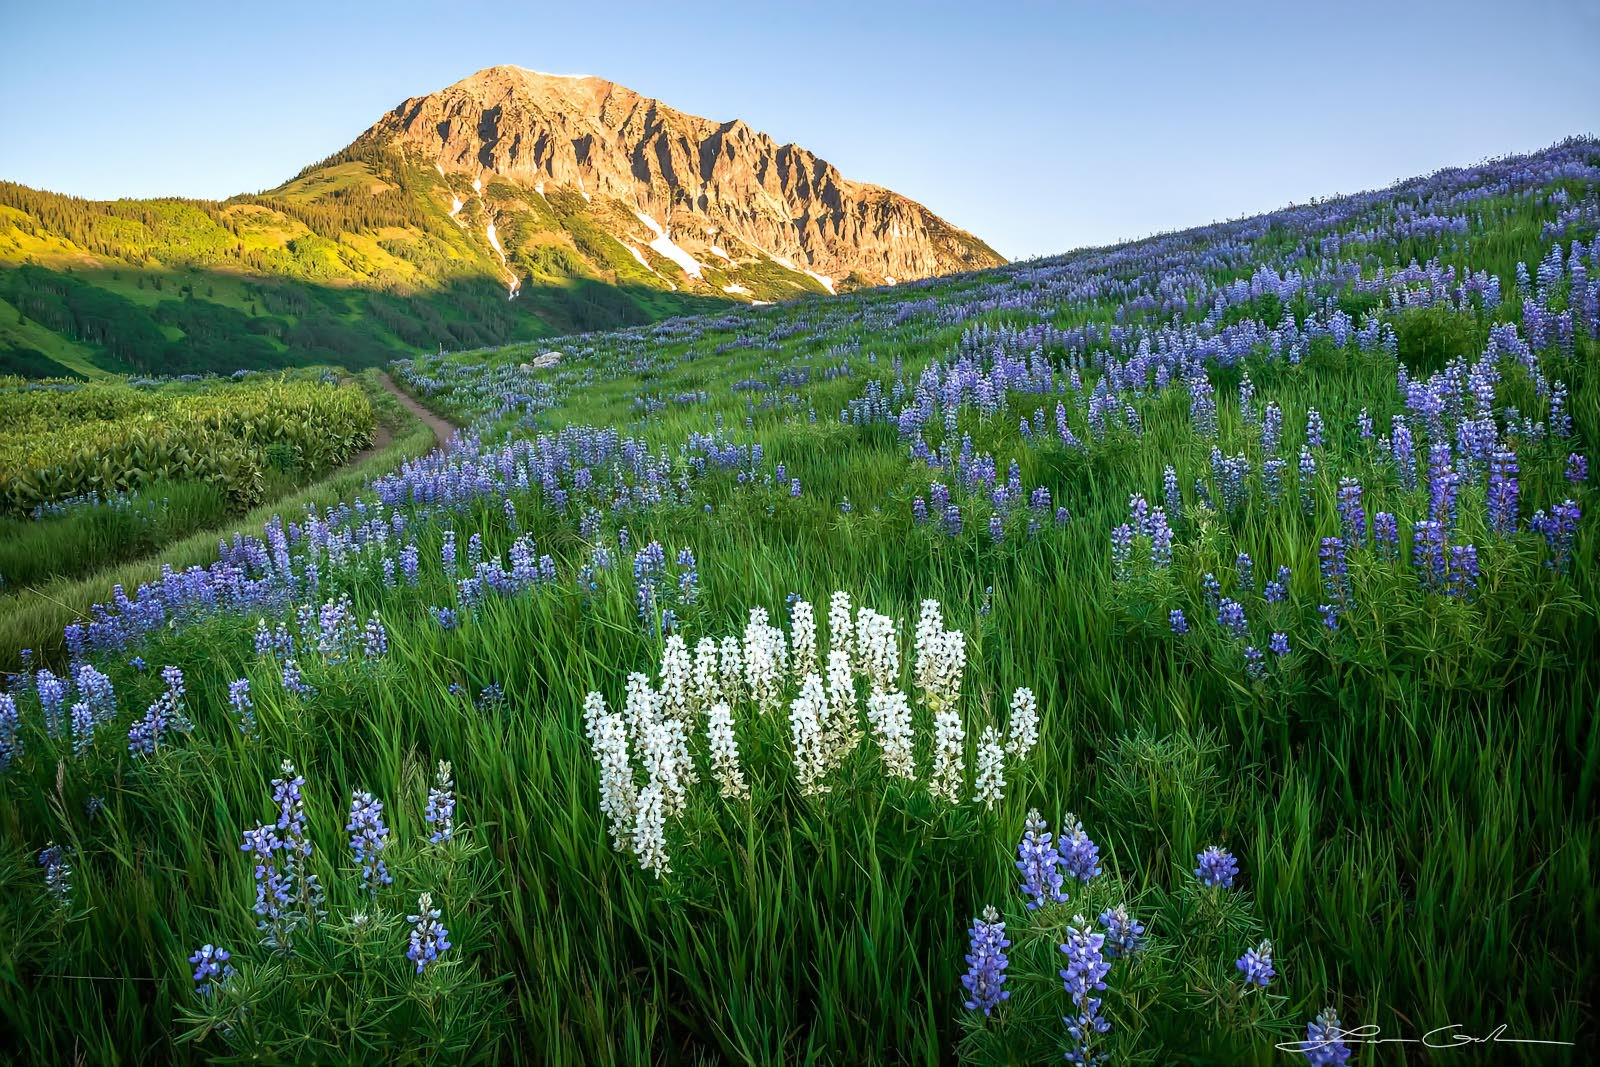 White and purple lupine flowers on a hill meadow and mountain in the background